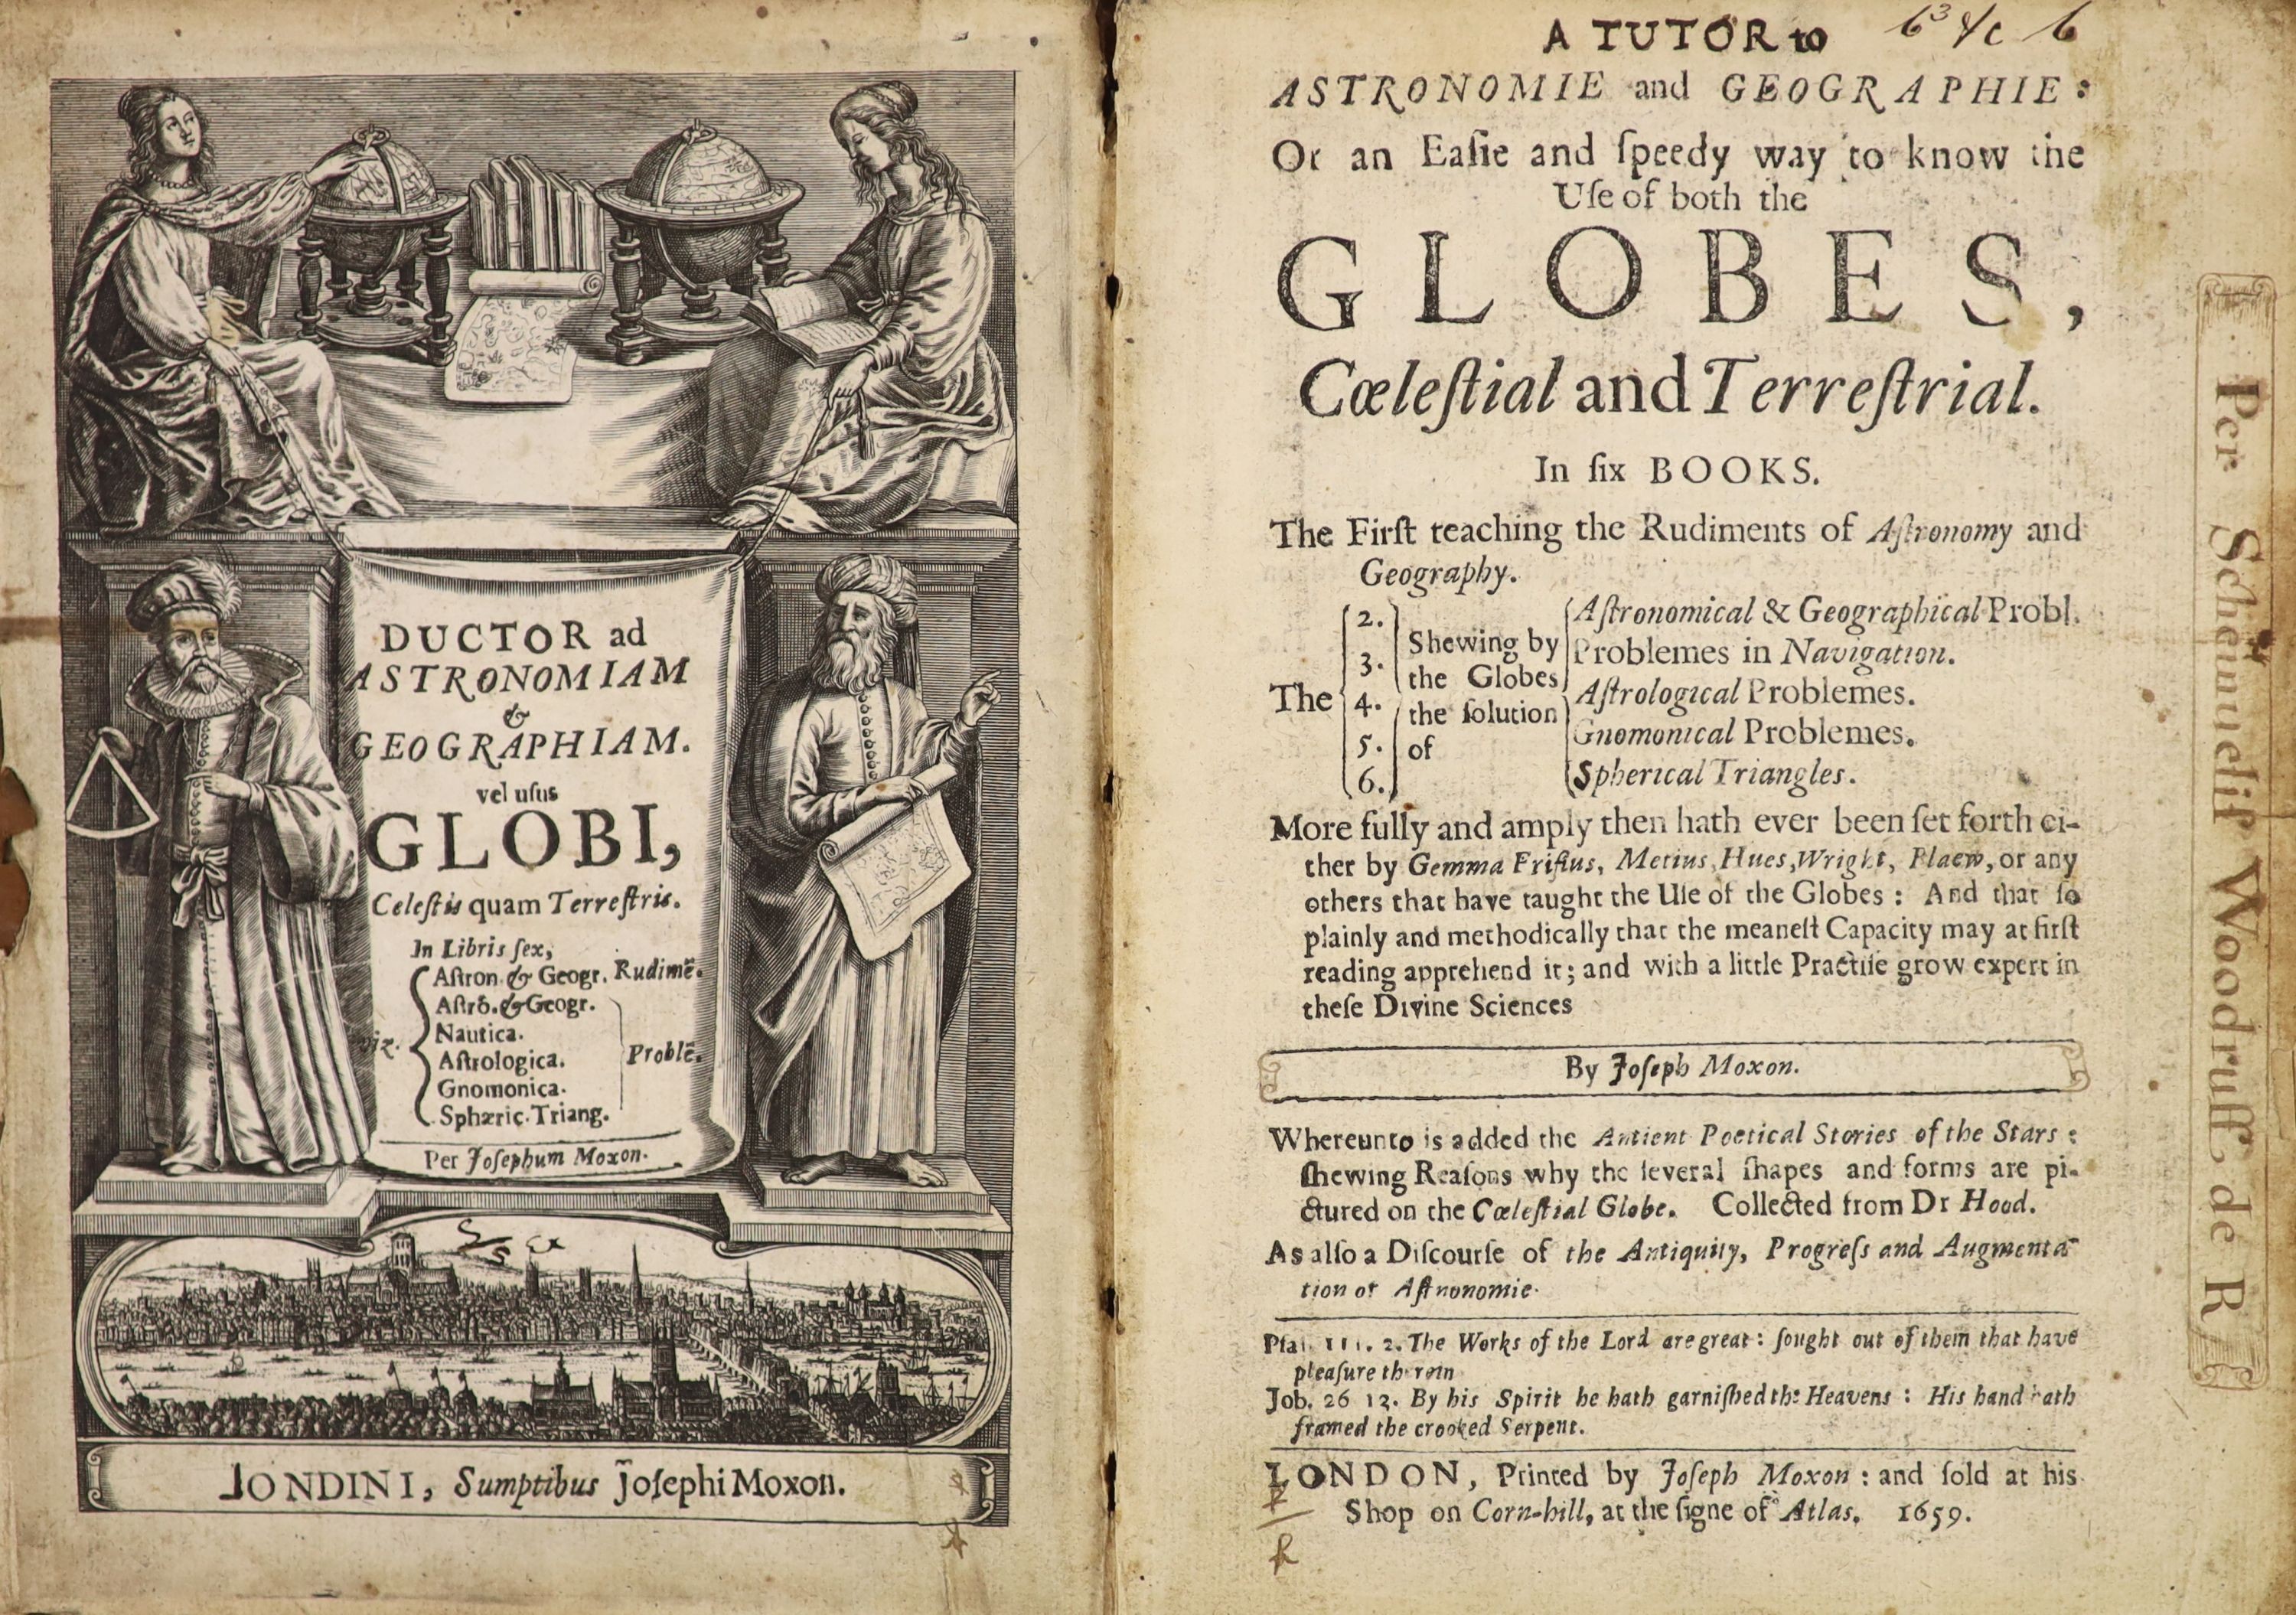 Moxon, Edward - A Tutor to Astronomy and Geography, 1st edition, 8vo, contemporary calf, with engraved title in Latin, depicting portraits of Tycho Brahe and Ptolemy, London, 1659